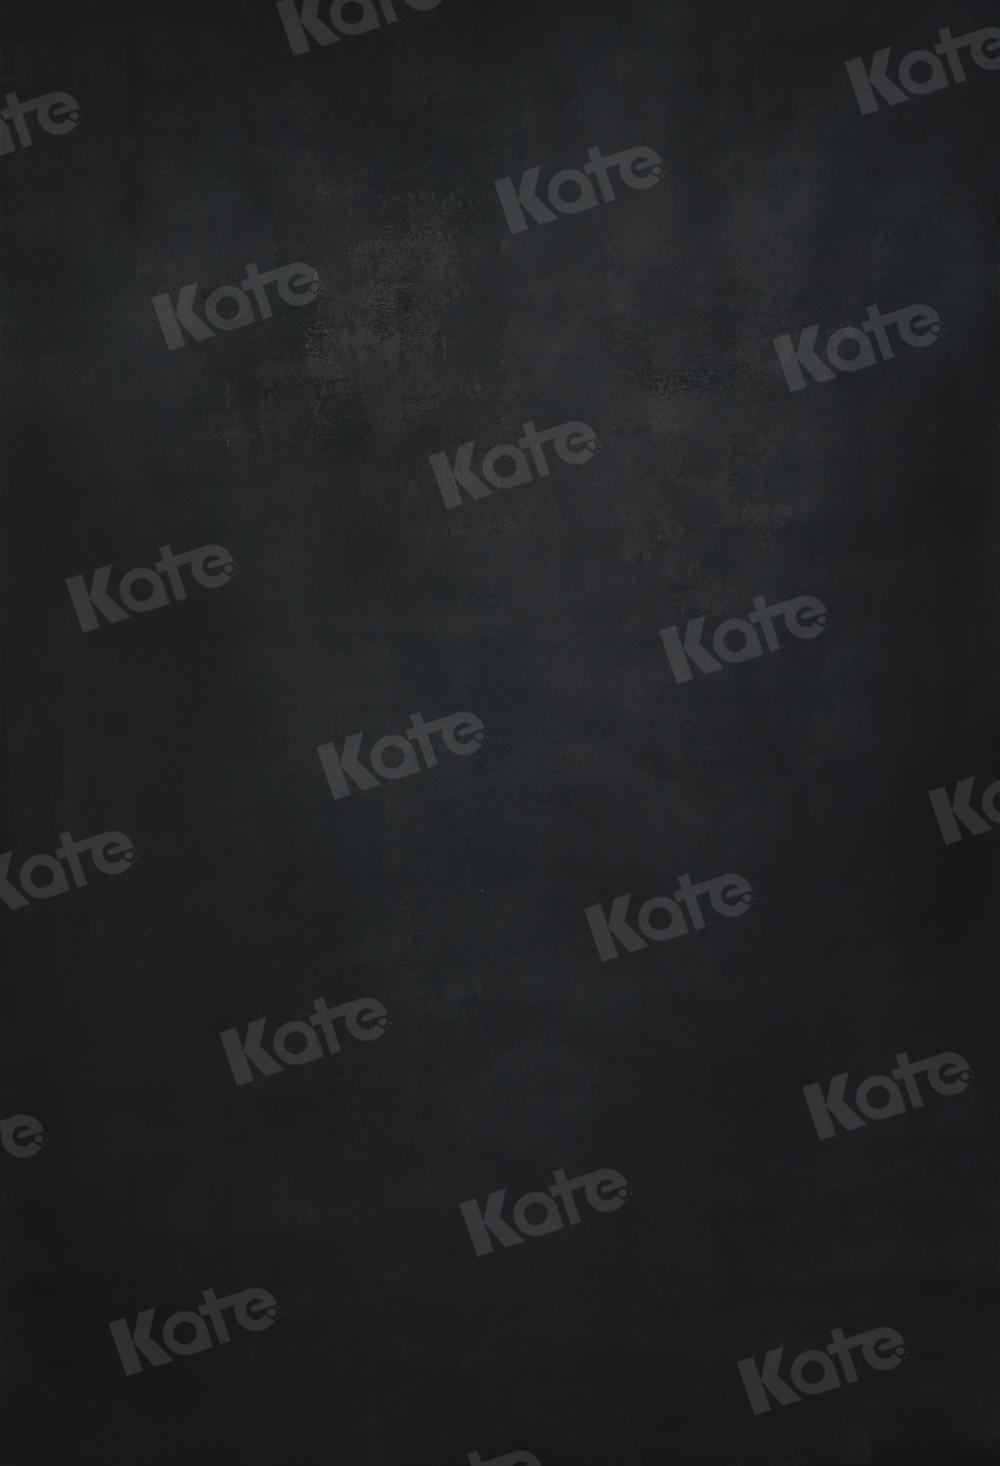 Kate Abstract Black Textured Backdrops for Photography